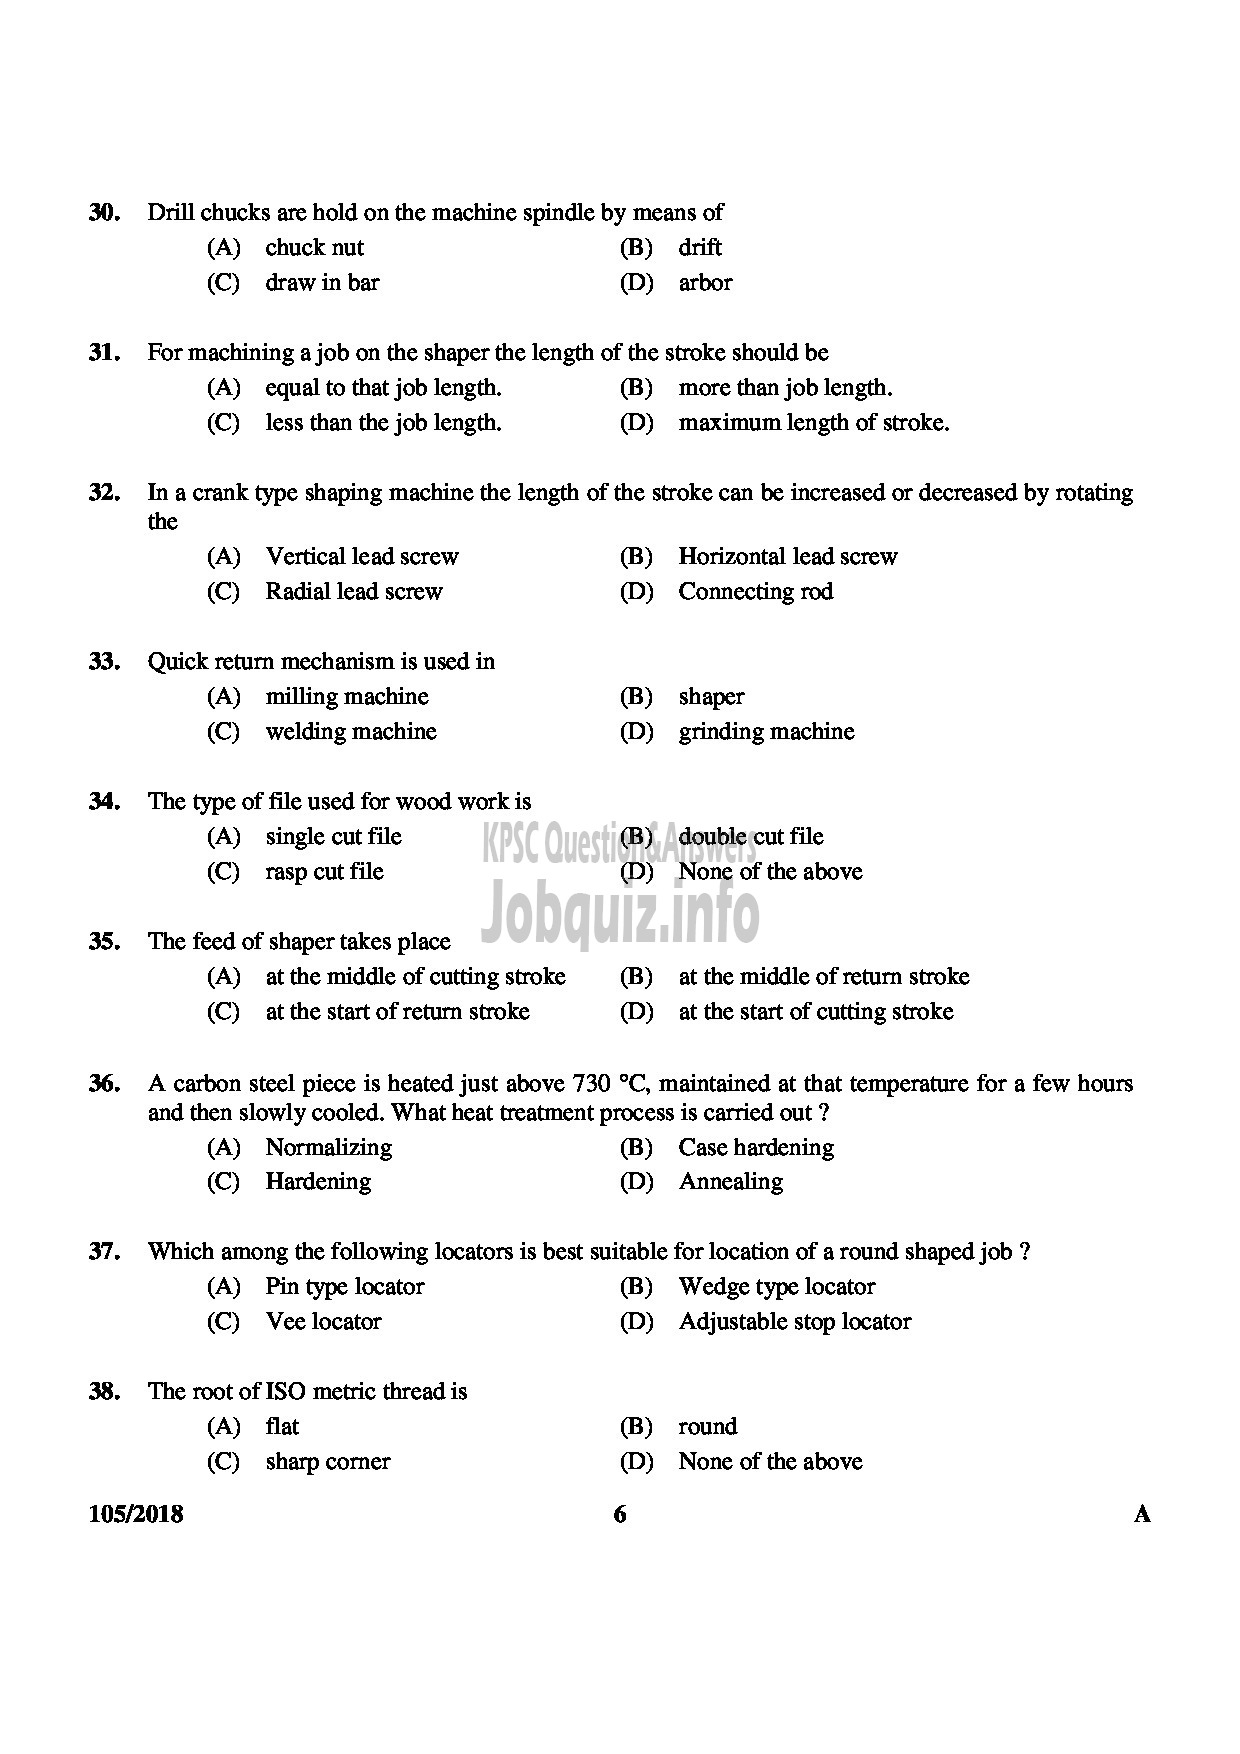 Kerala PSC Question Paper - JUNIOR INSTRUCTOR MACHINIST INDUSTRIAL TRAINING English -6